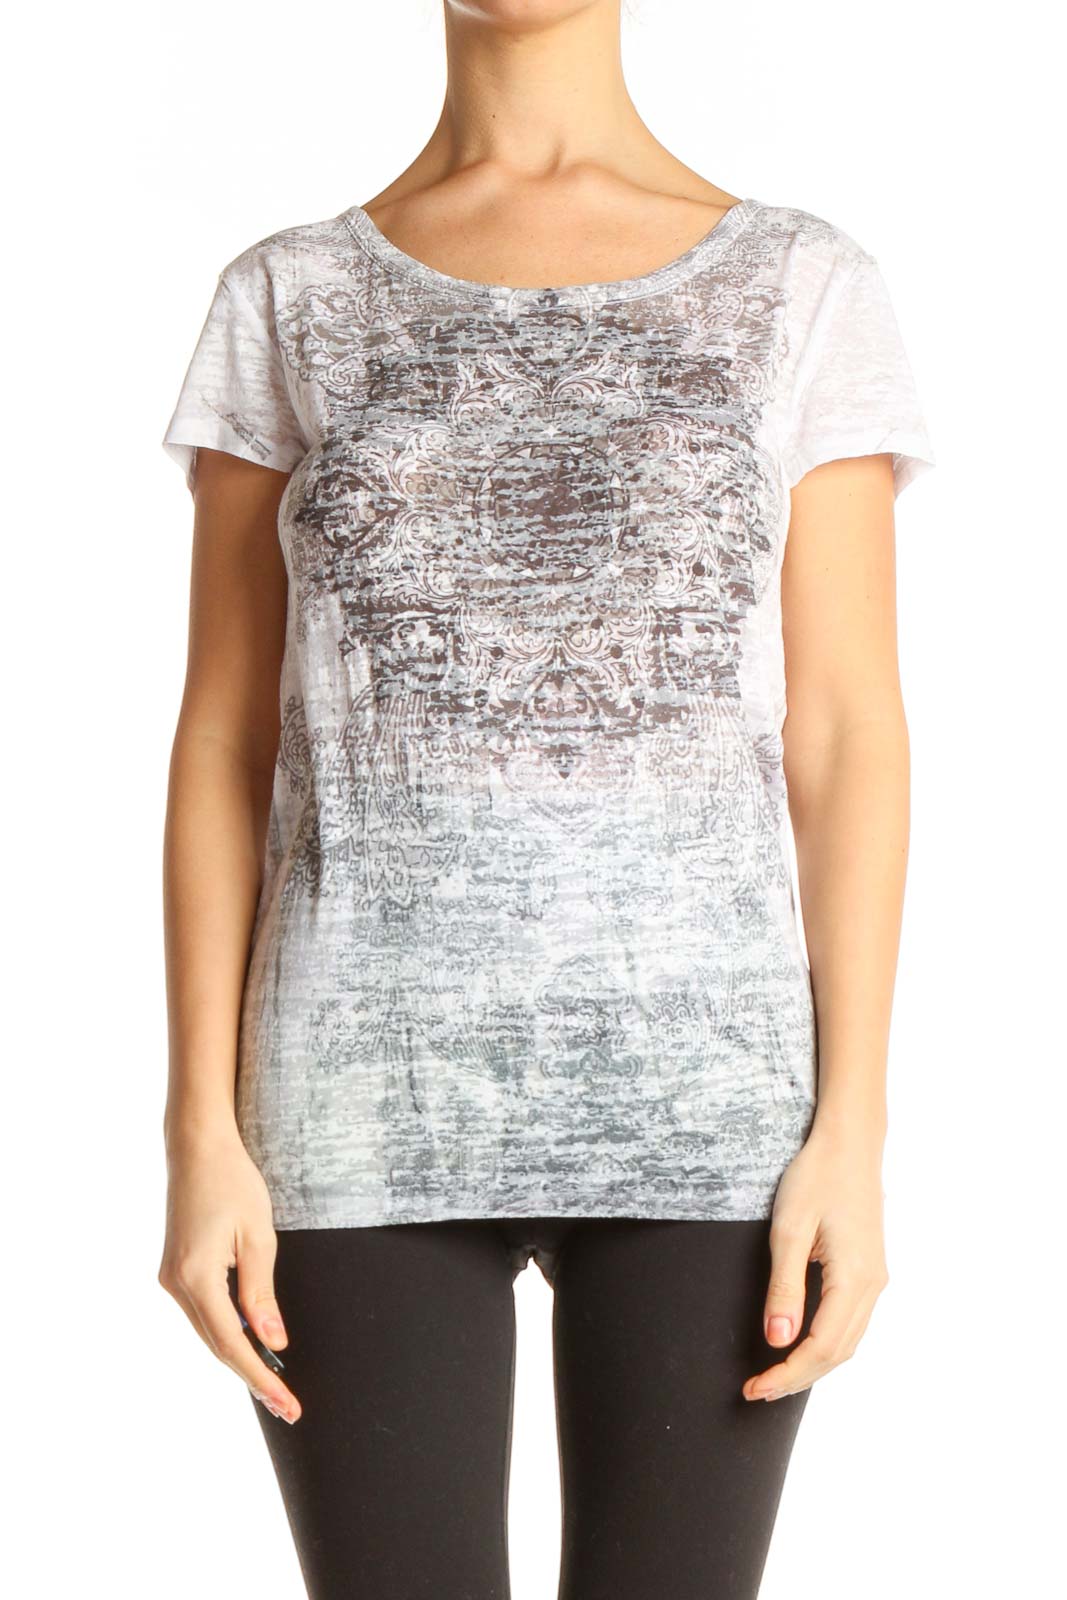 Beige Graphic Print Casual T-Shirt Front